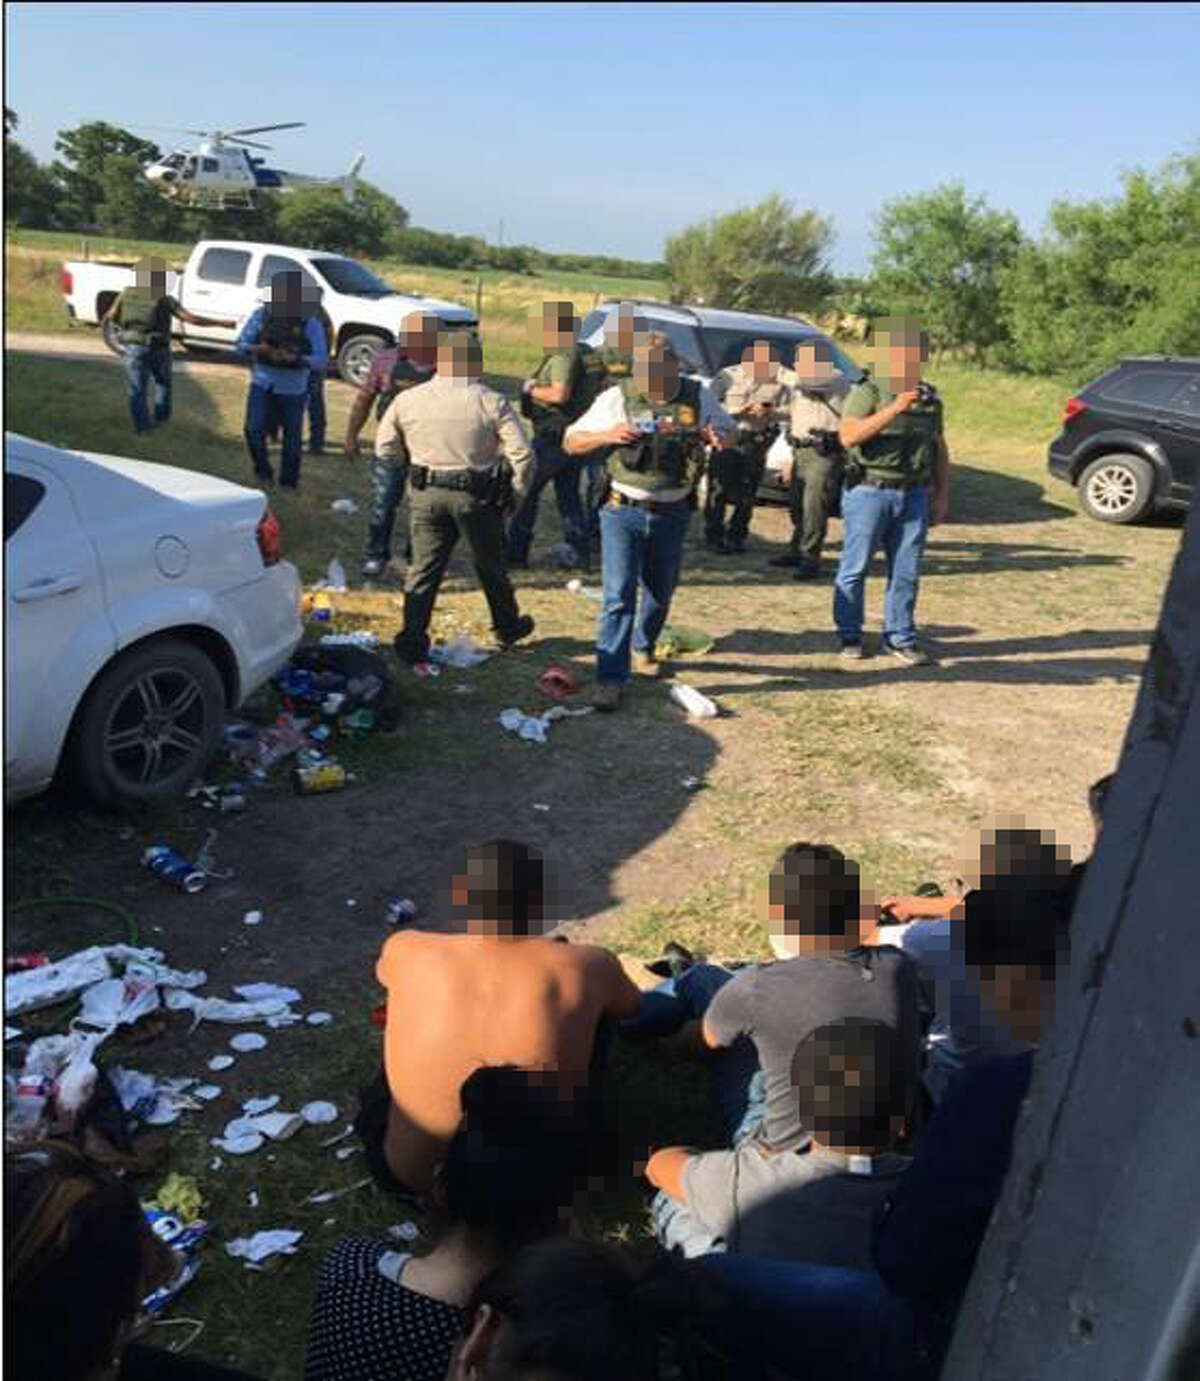 Border Patrol agents discovered a stash house in Weslaco on April 23. Agents apprehended 21 illegal aliens.